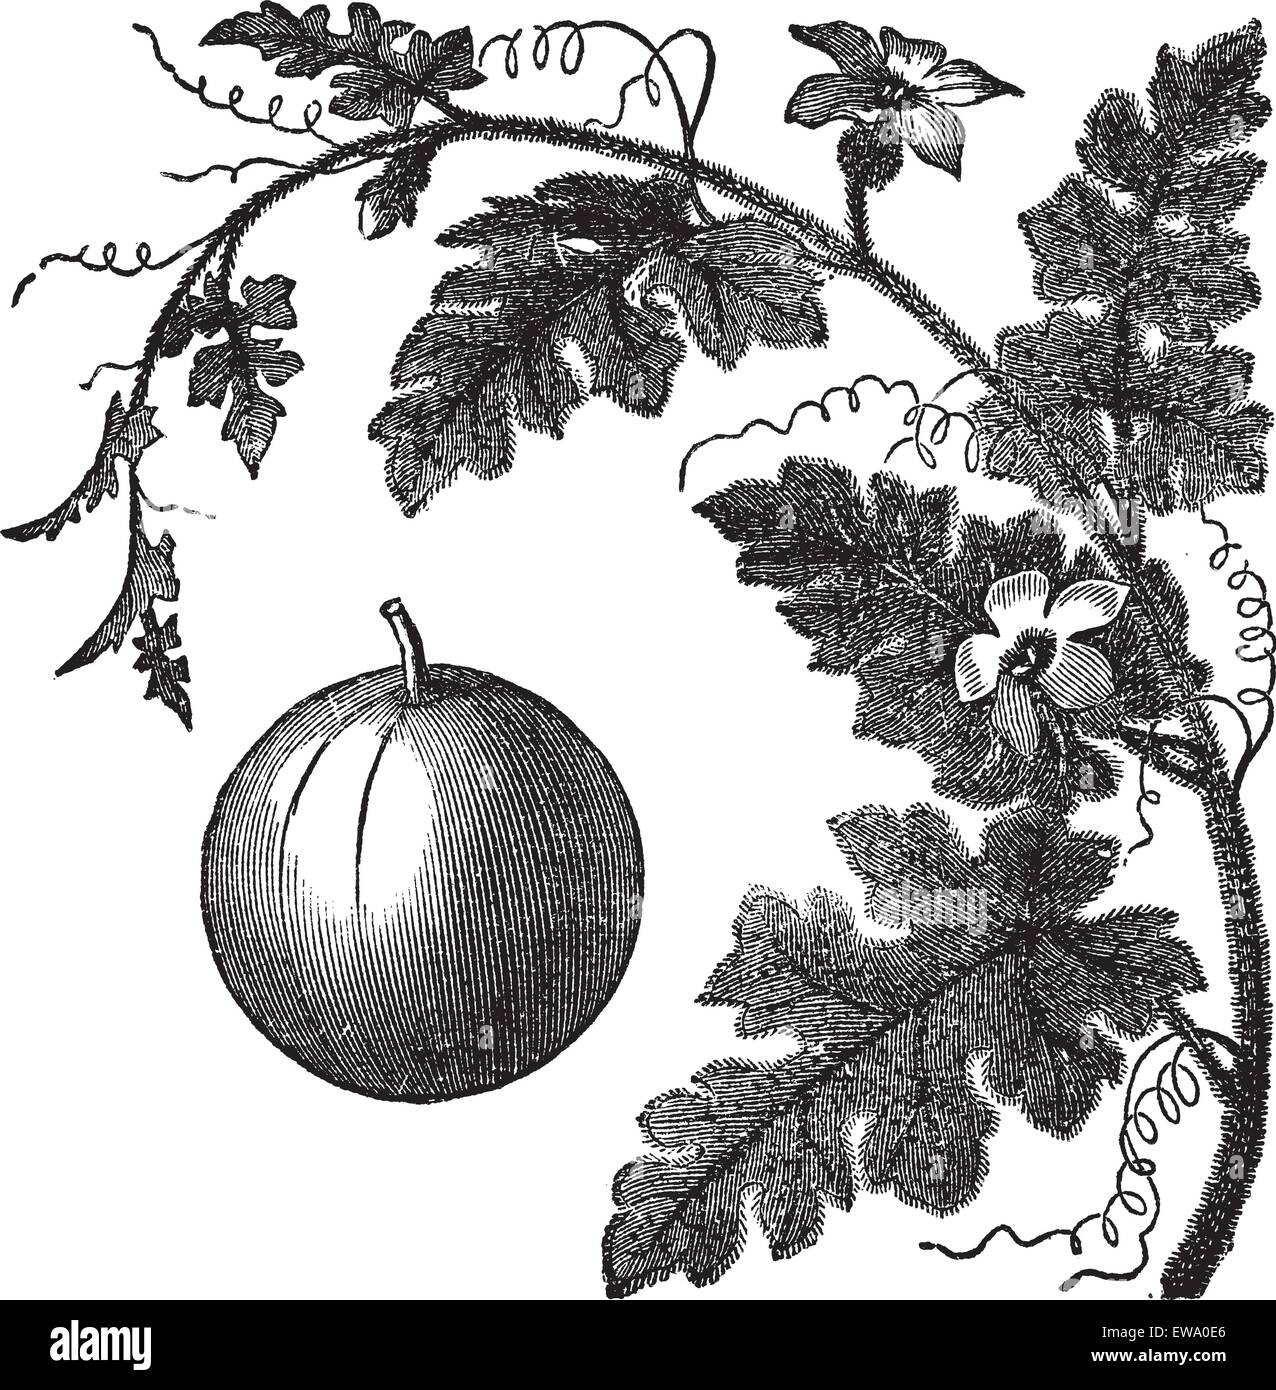 Colocynth or Bitter Apple or Bitter Cucumber or Egusi or Vine of Sodom or Citrullus colocynthis, vintage engraving. Old engraved illustration of a Colocynth showing fruit. Stock Vector